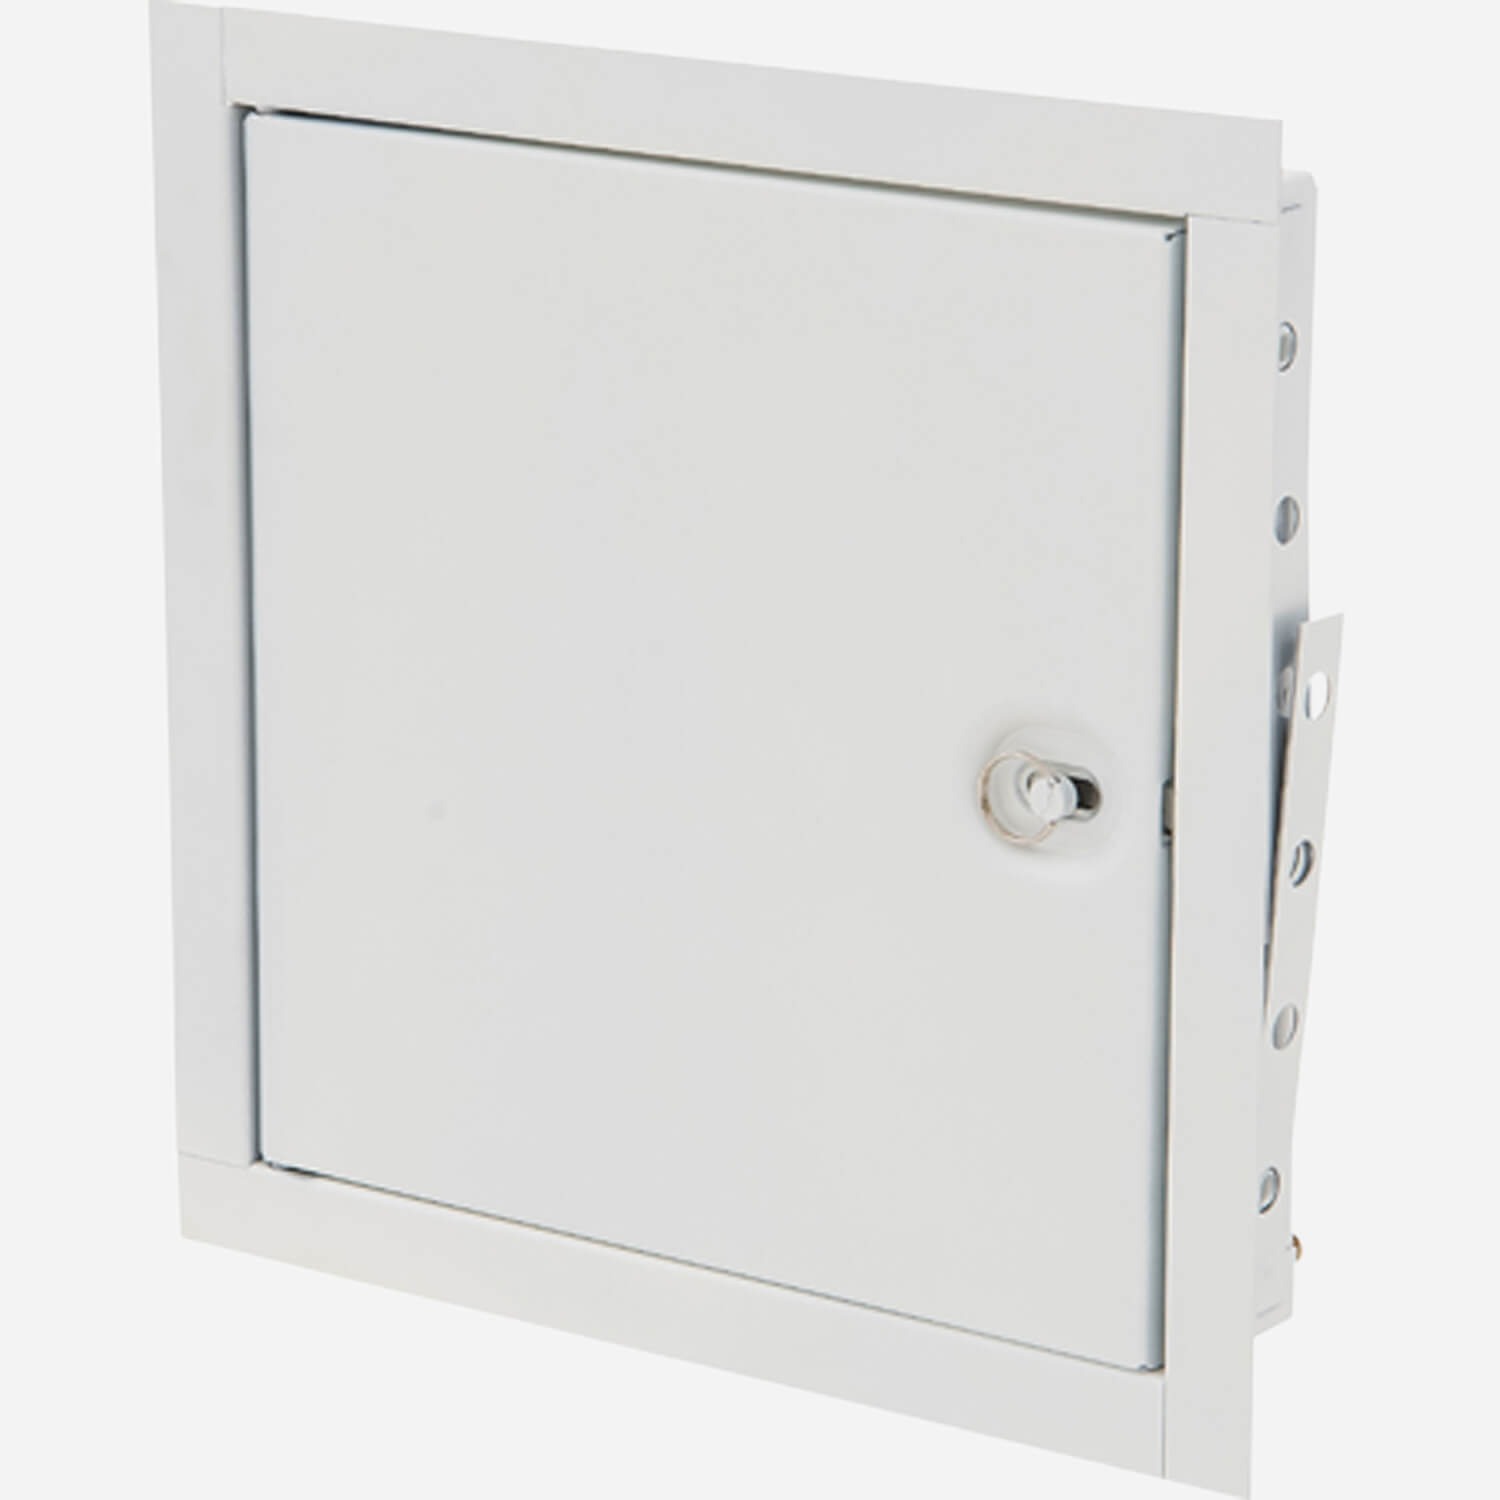 Access Door - E-FR 12" x 12" Non-Insulated Fire Rated for Walls